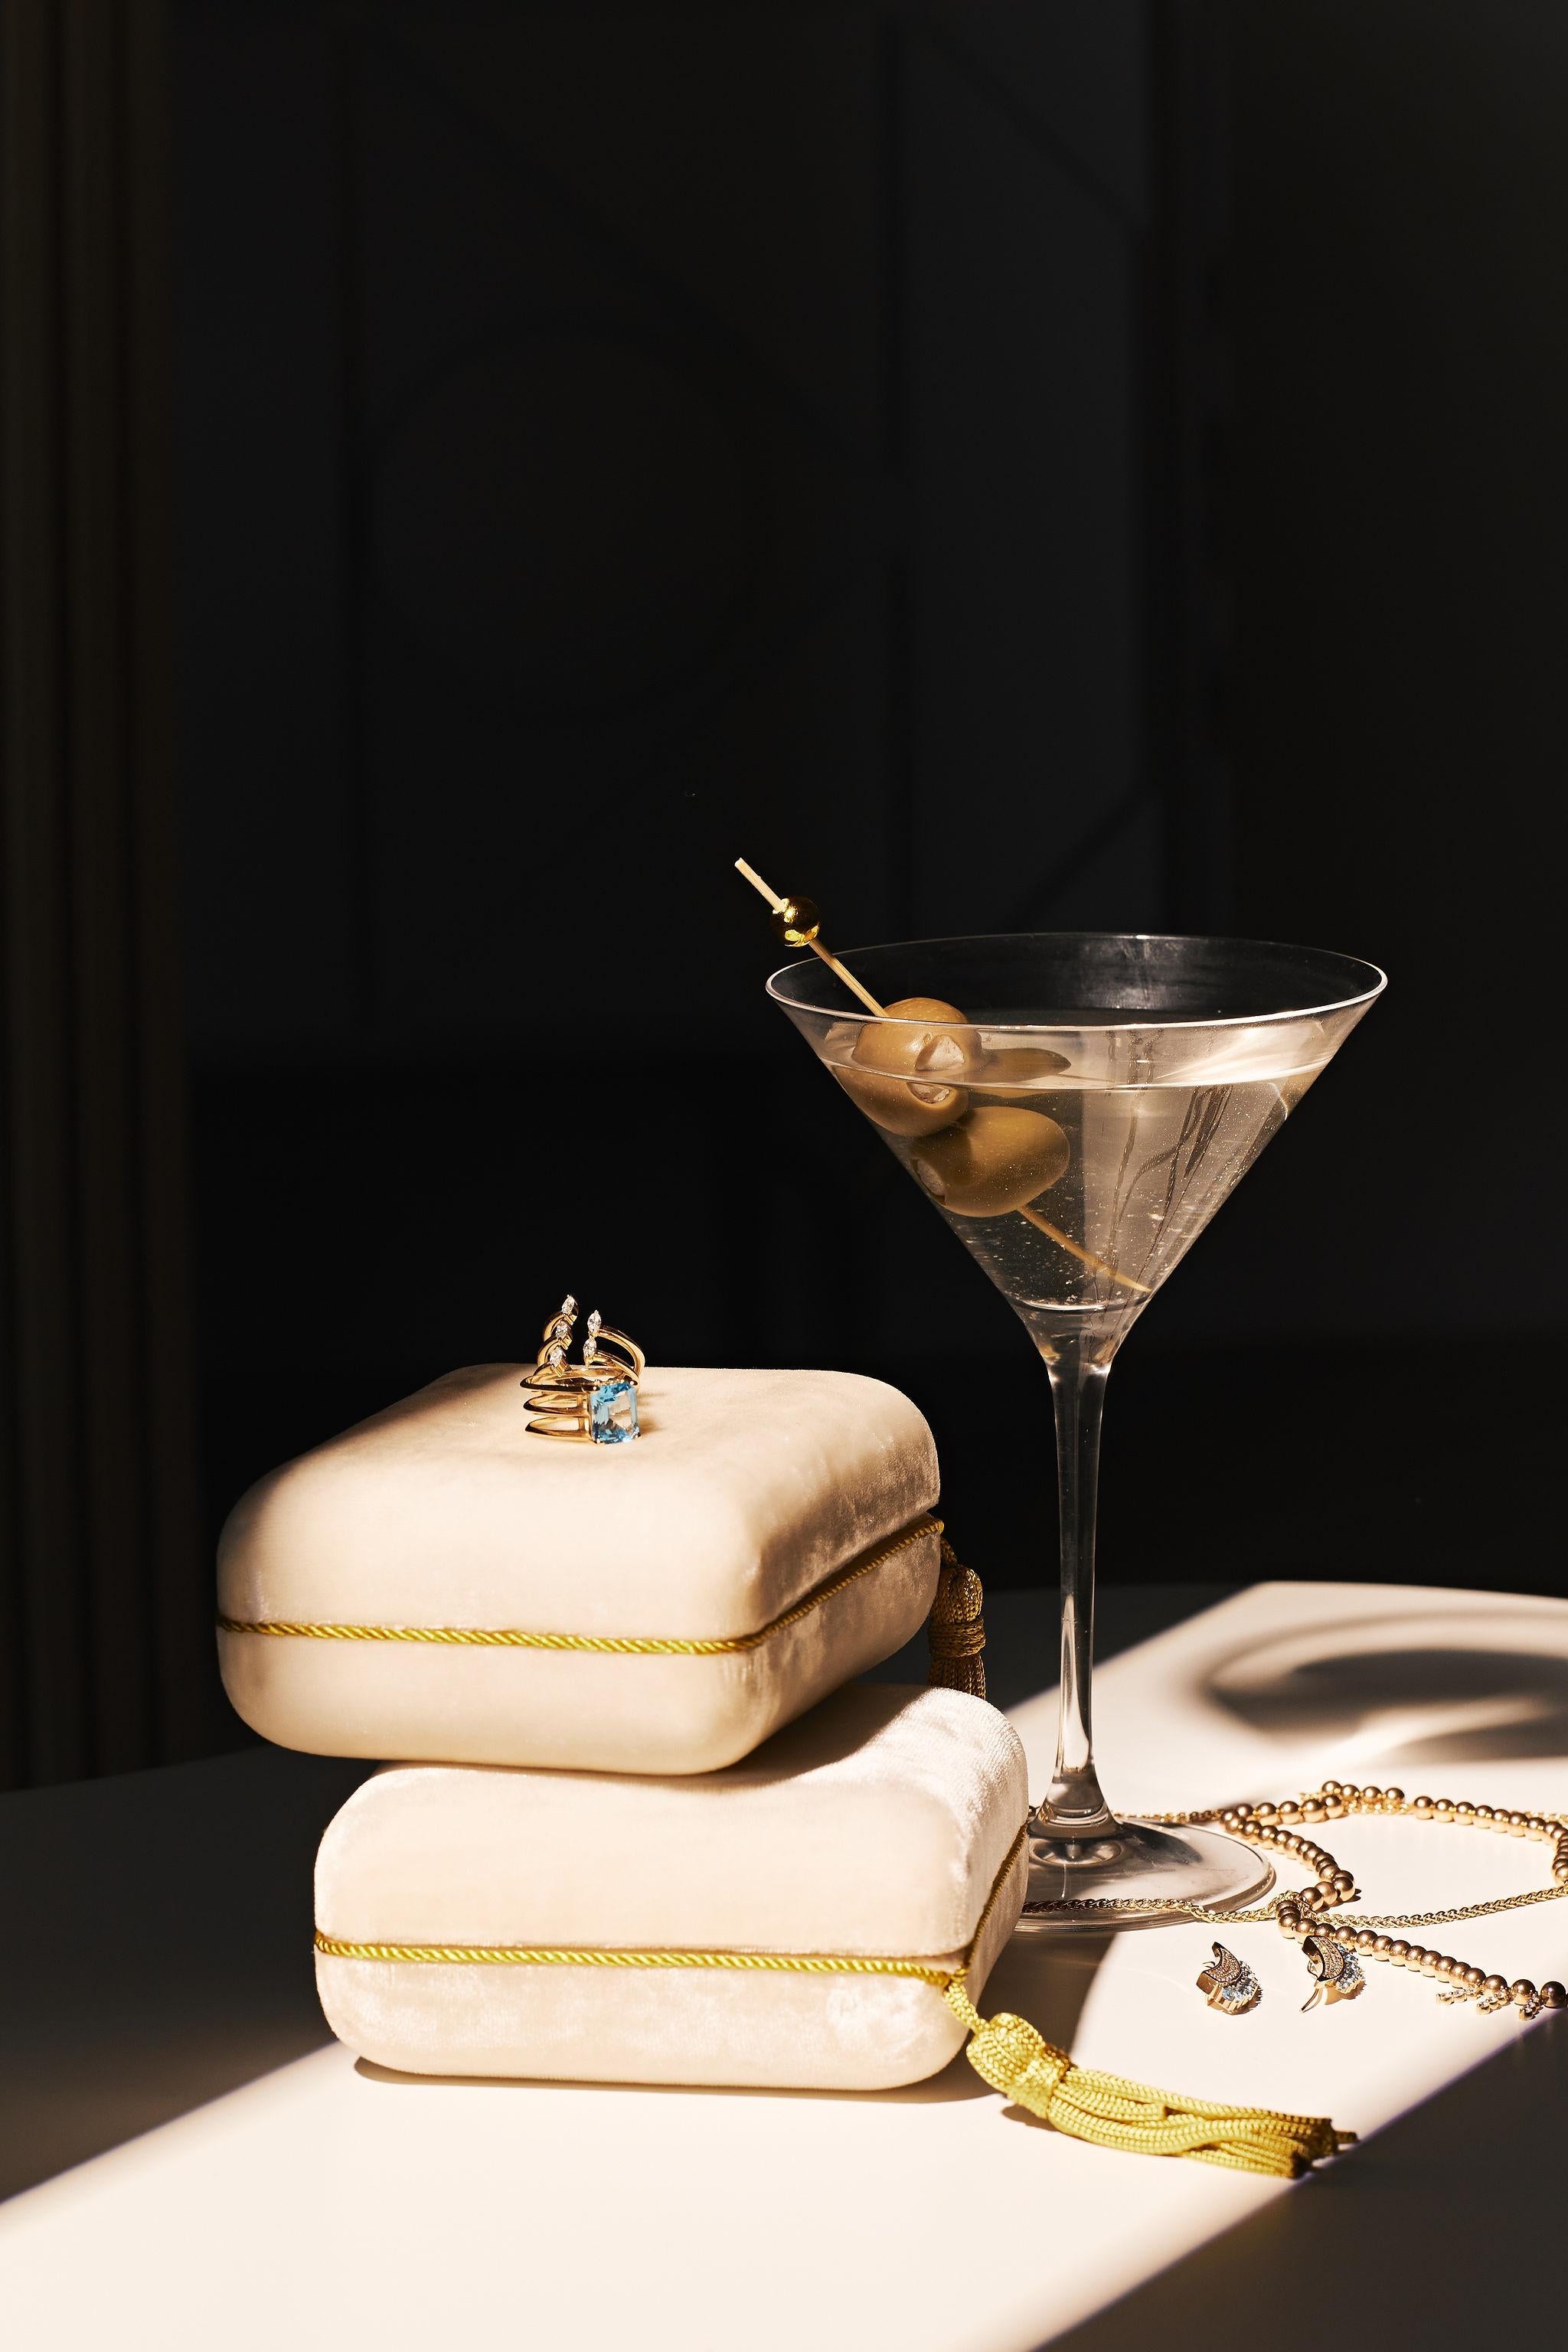 Whether at home, on the go, or traveling, make sure your precious jewels are always safe with this white crushed velvet pochette case with gold tassel detailing. Featuring a multi-purpose insert with two sides. One side of the insert suitable for